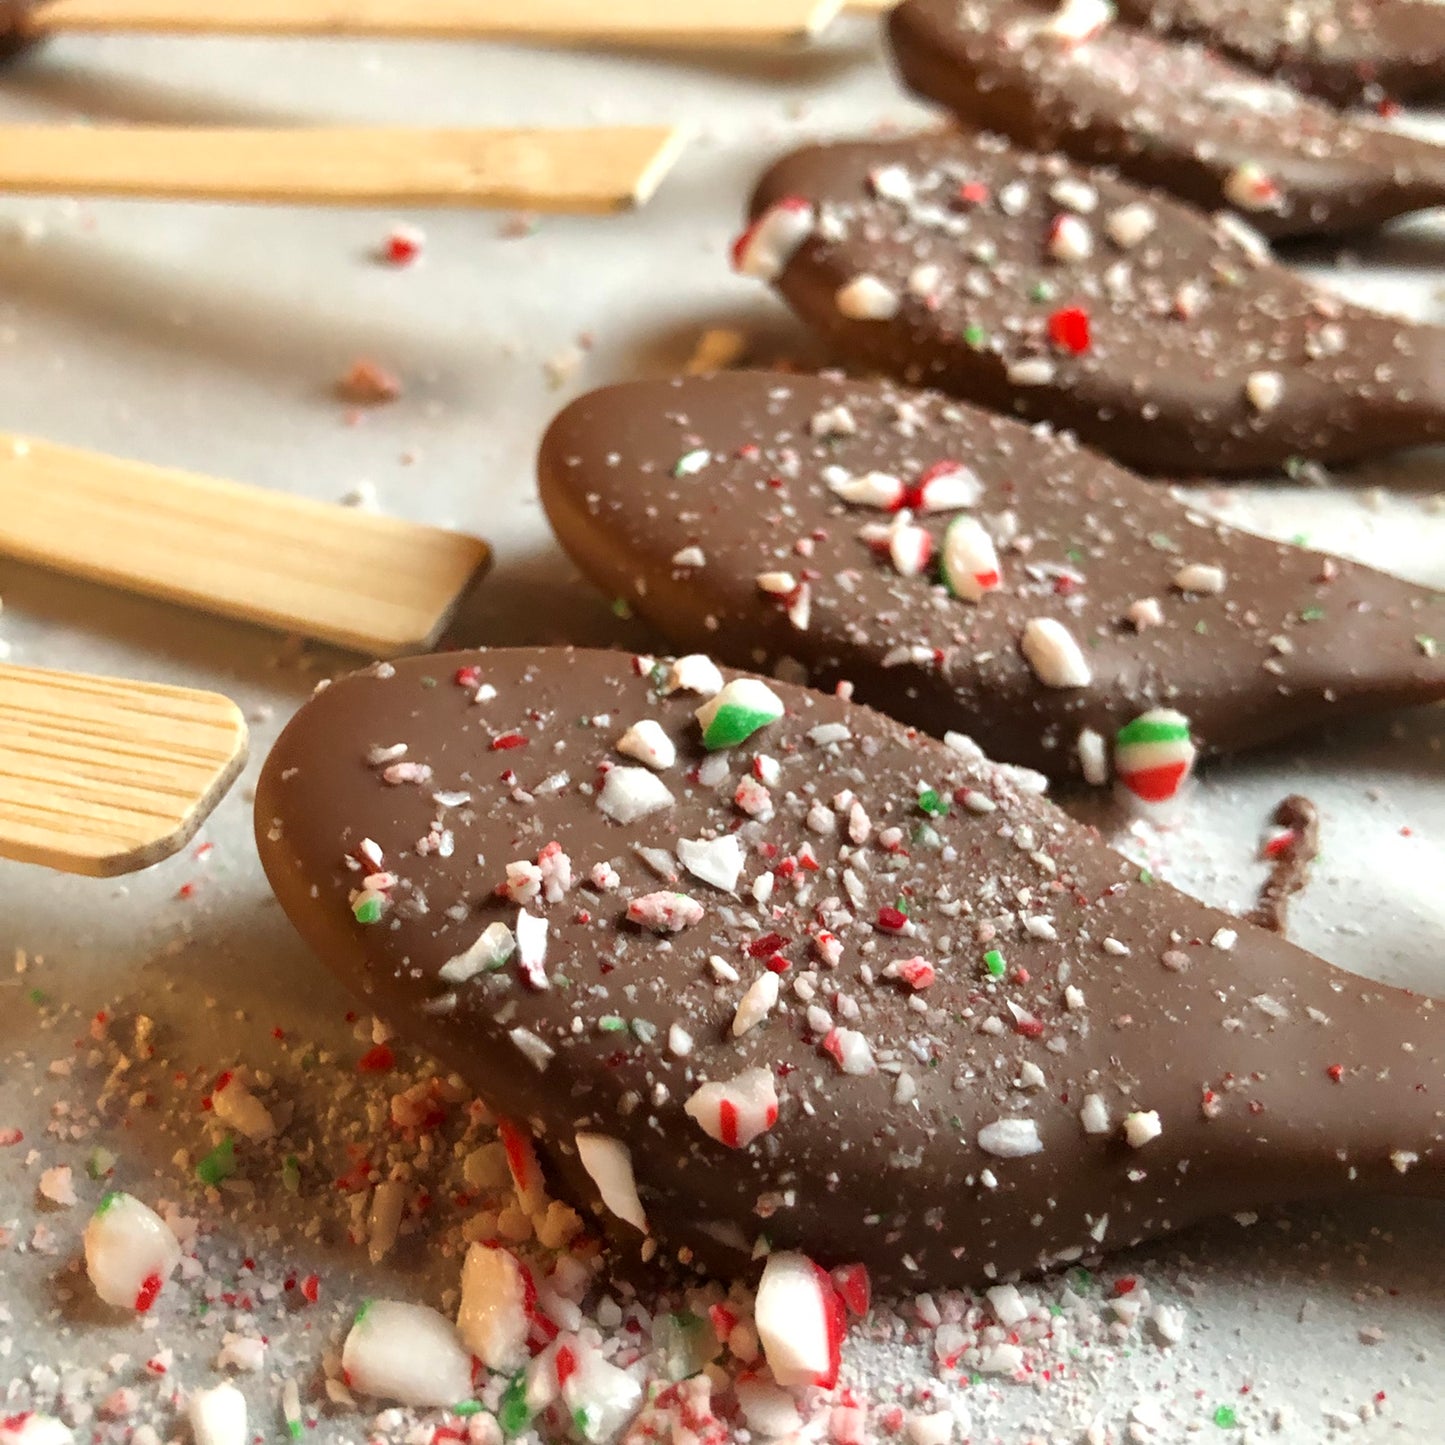 Chocolate covered spoons - Assorted flavours